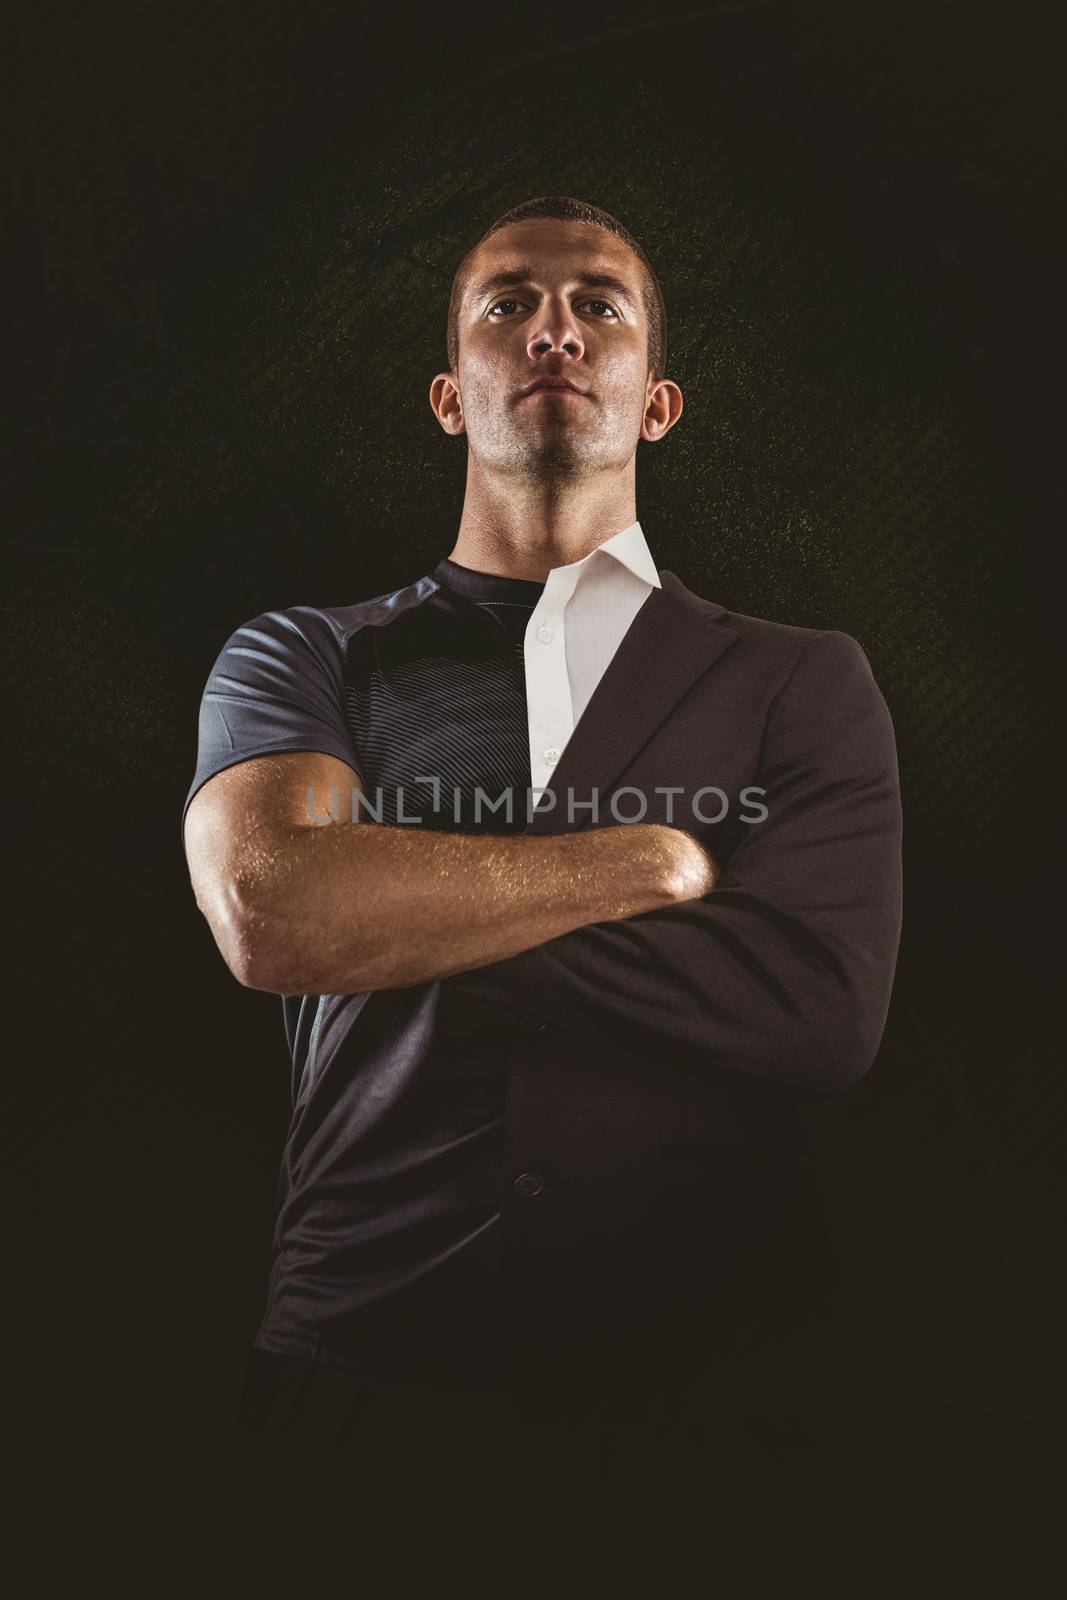 Confident rugby player with arms crossed against half a suit